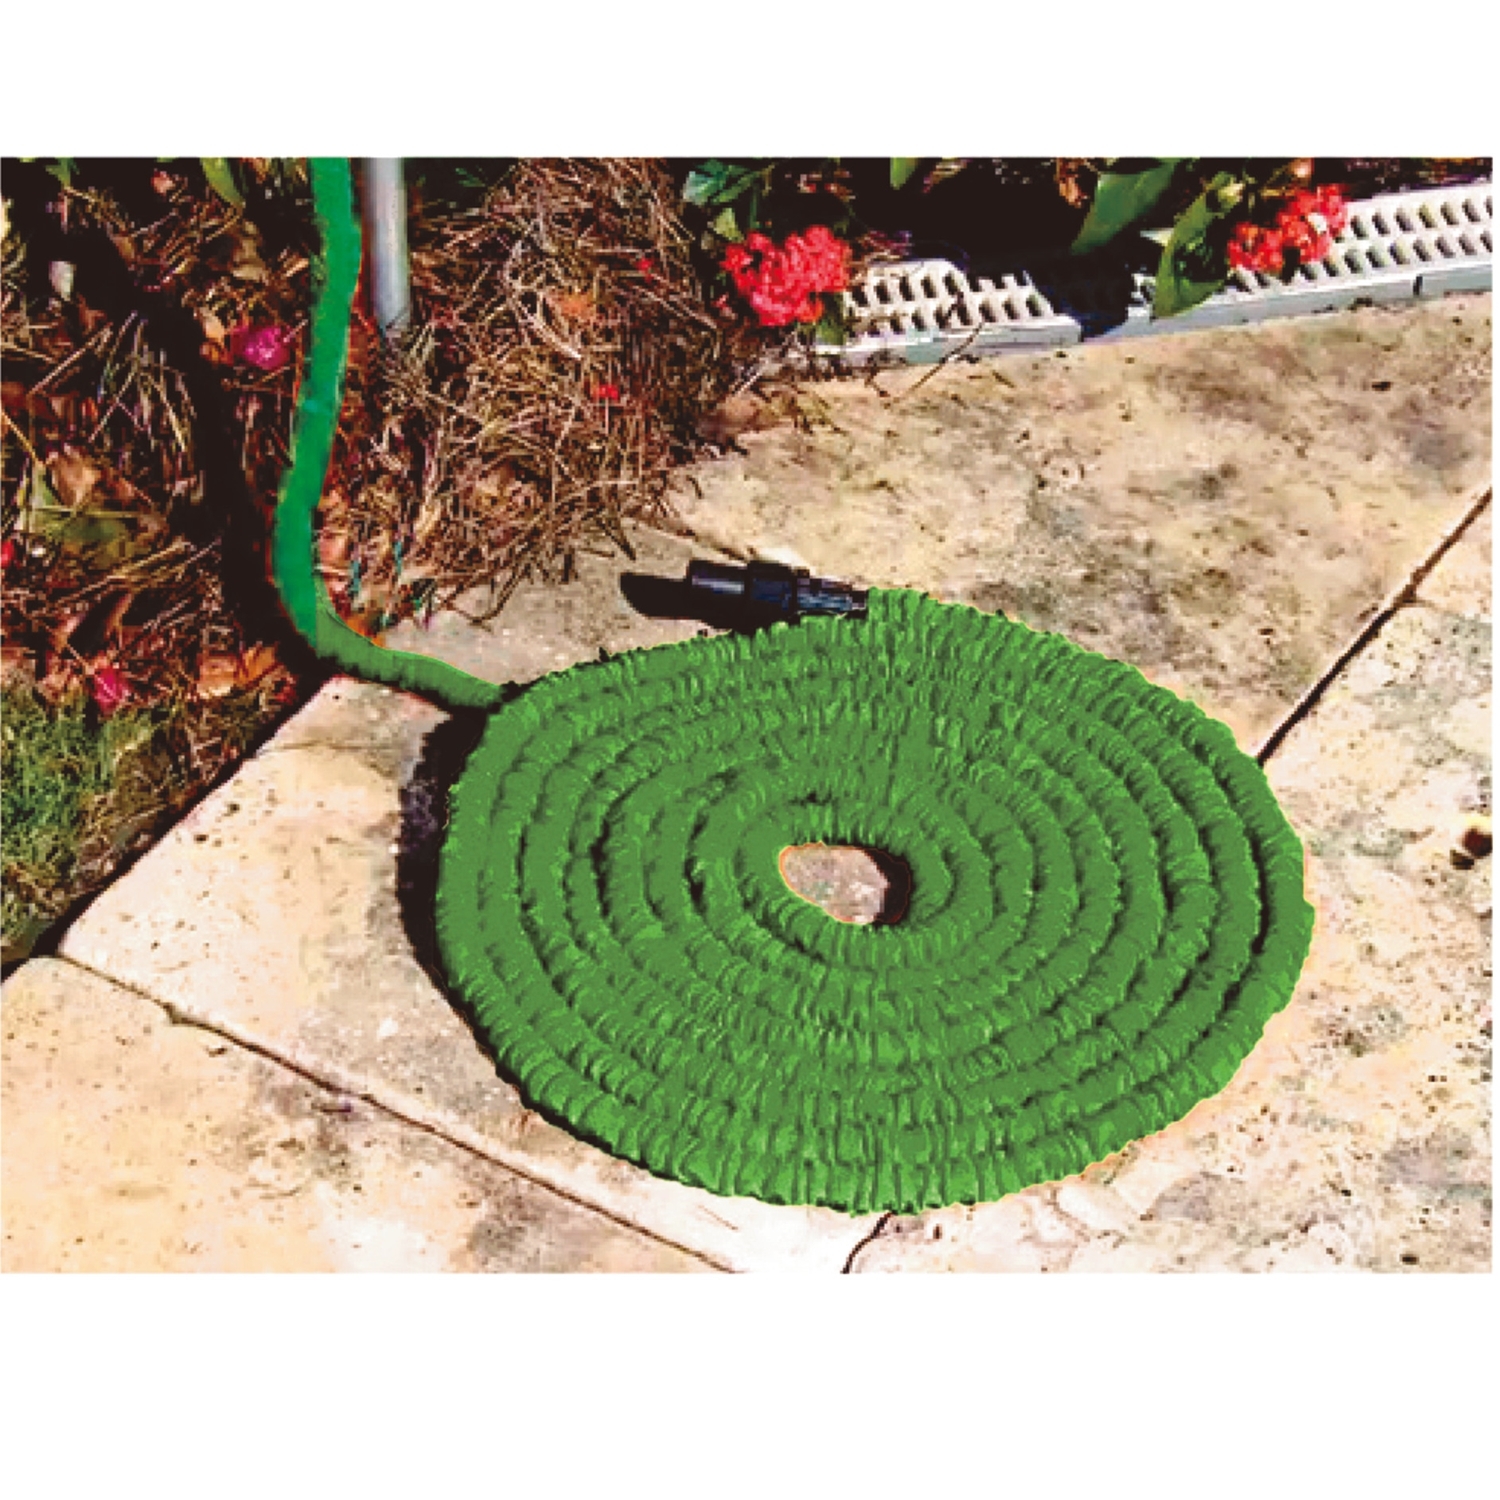 Expandable 50ft Kink Free Hose with Spray Gun Image 4